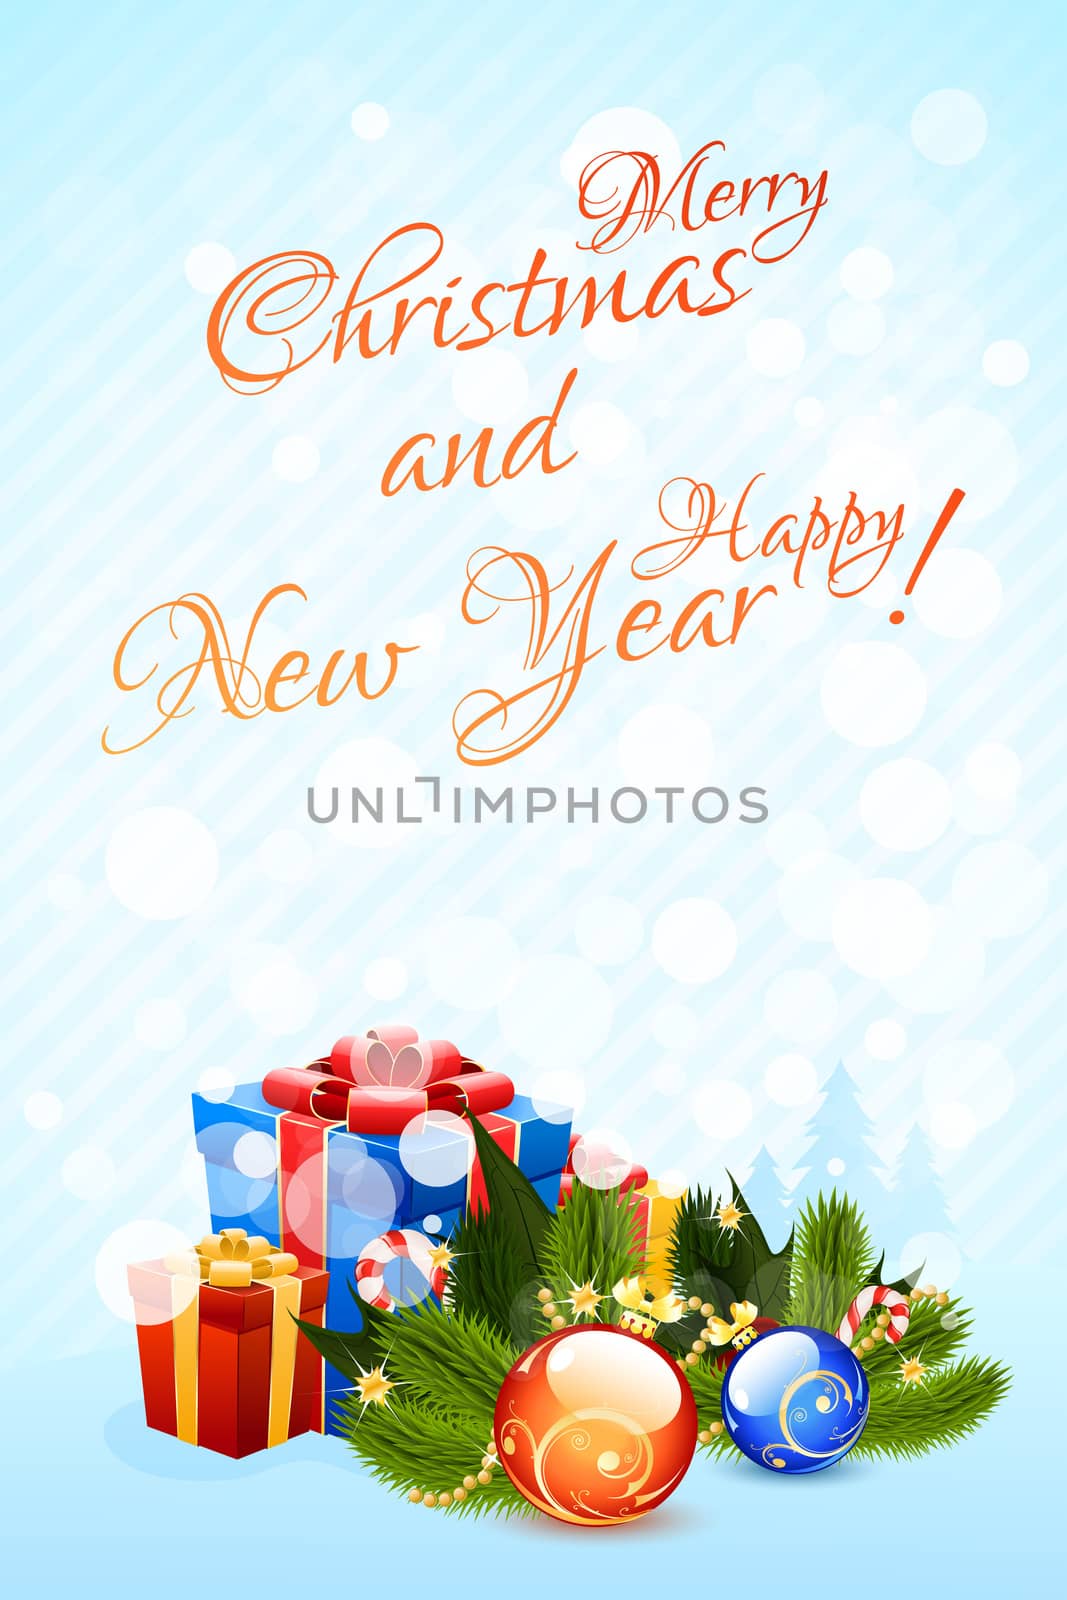 Christmas Greeting Card with Presents and Decorations